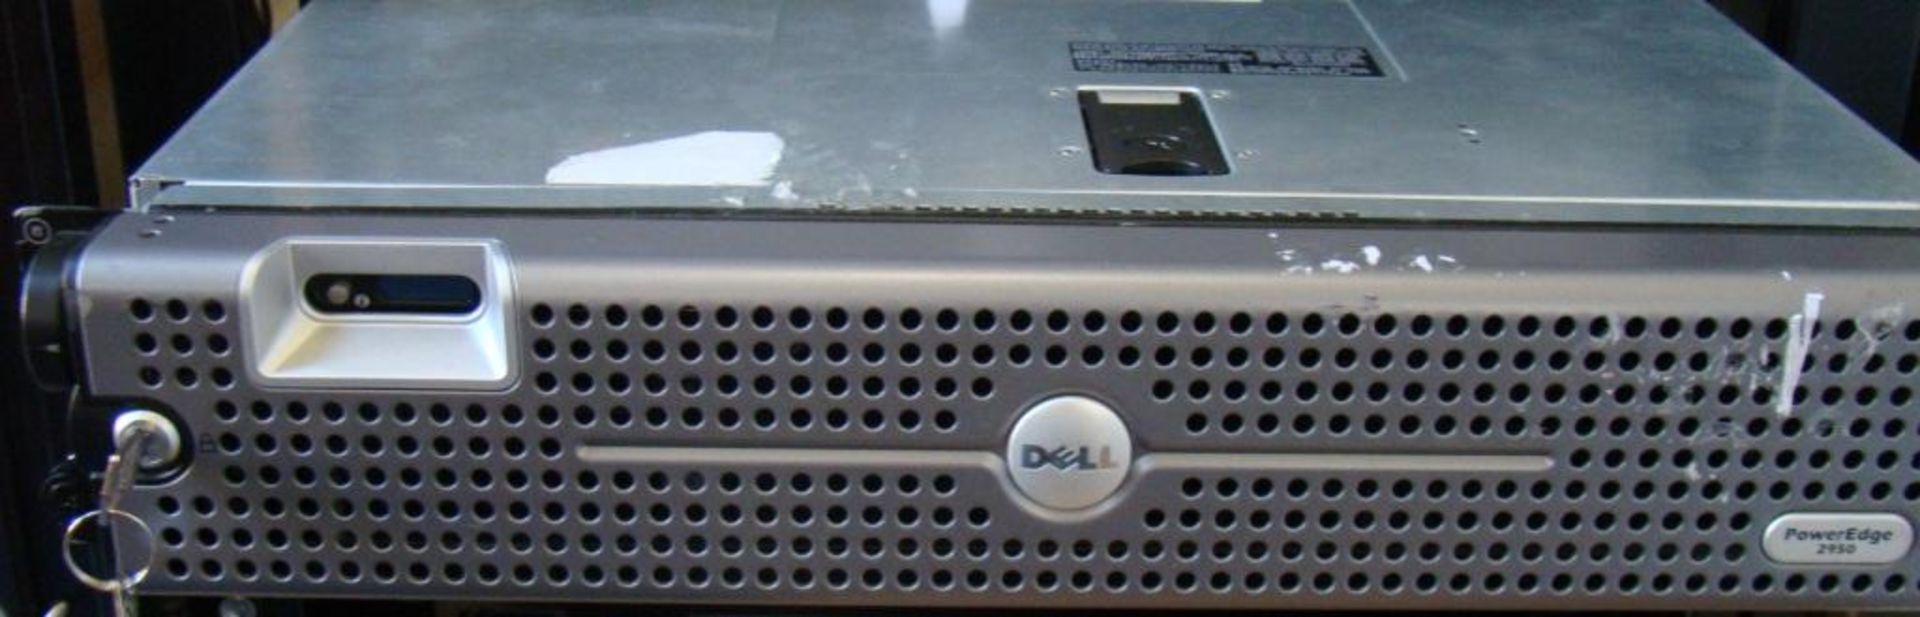 Dell 2950 Poweredge 2 * 3.00Ghz Quad Core 1333Mhz 32GB Memory 667Mhz 1* 132 GB HDD, 1 * 27 - Image 9 of 9